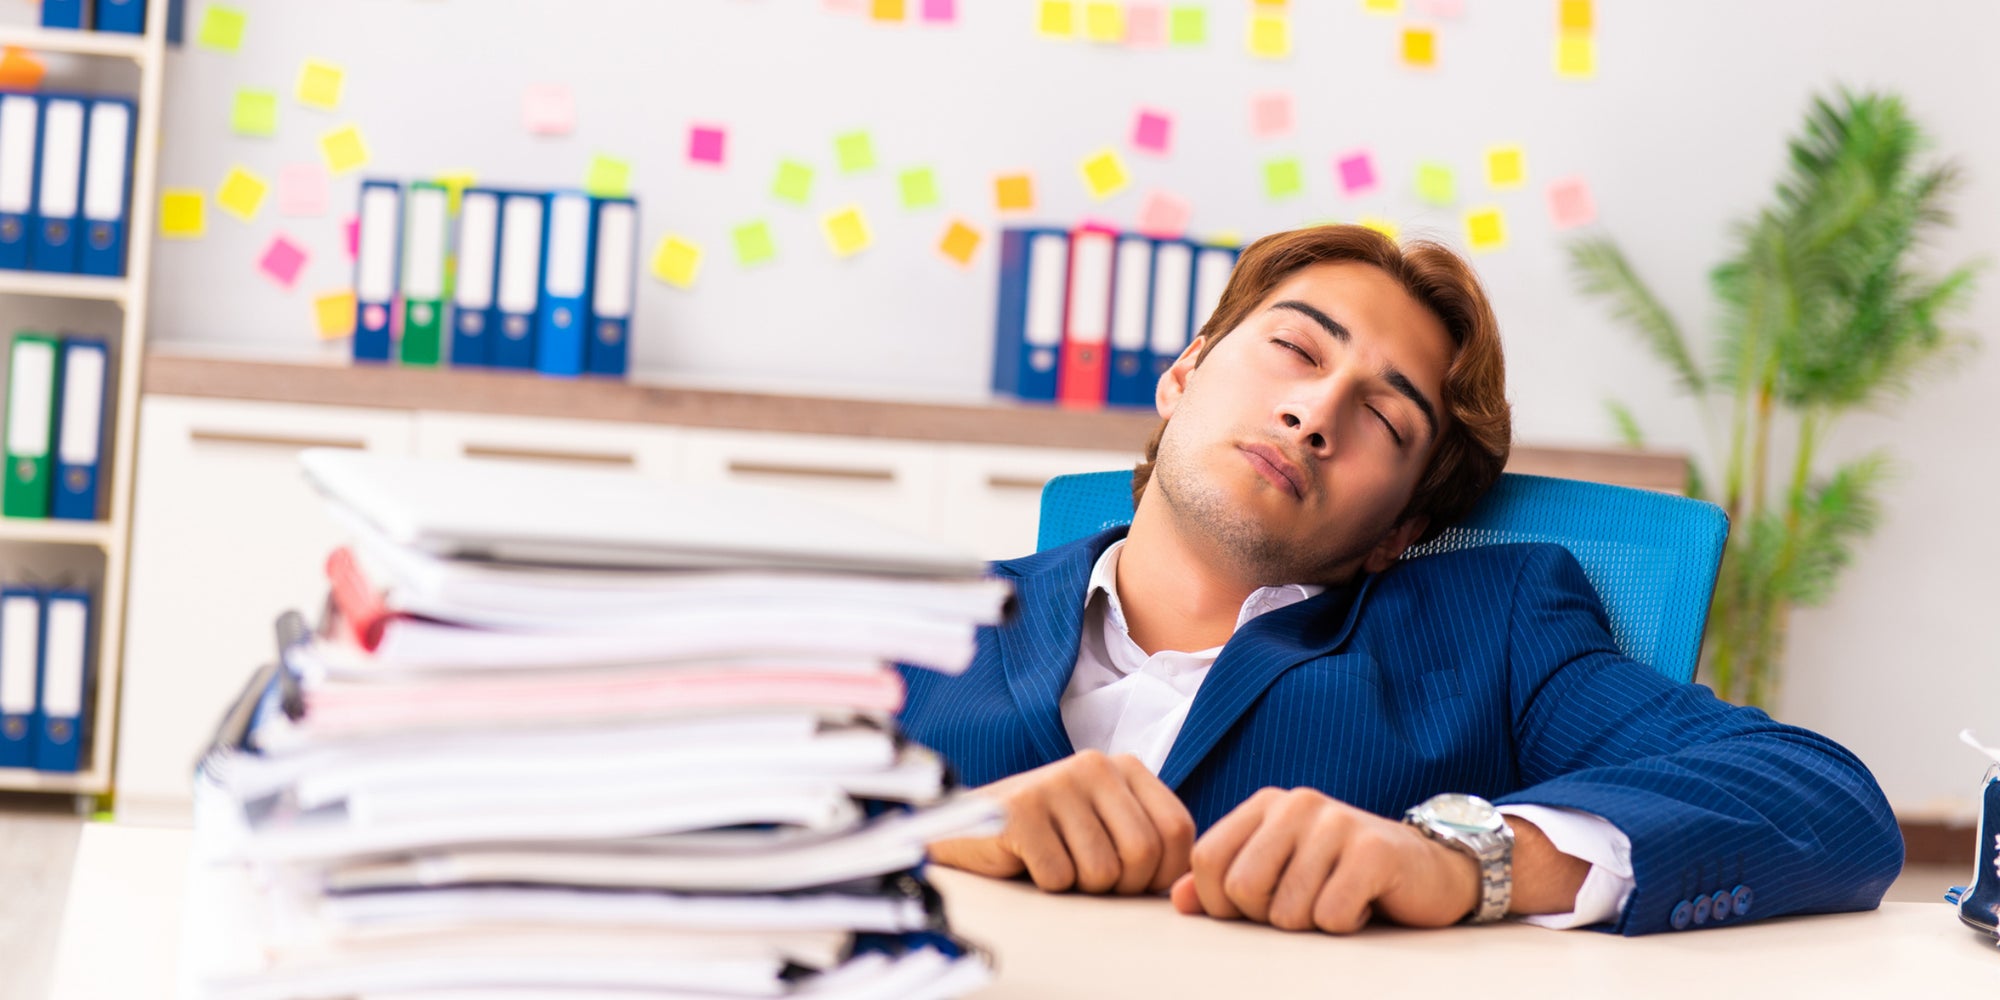 A Step-by-Step Guide on How You Can Power Nap Like a Pro